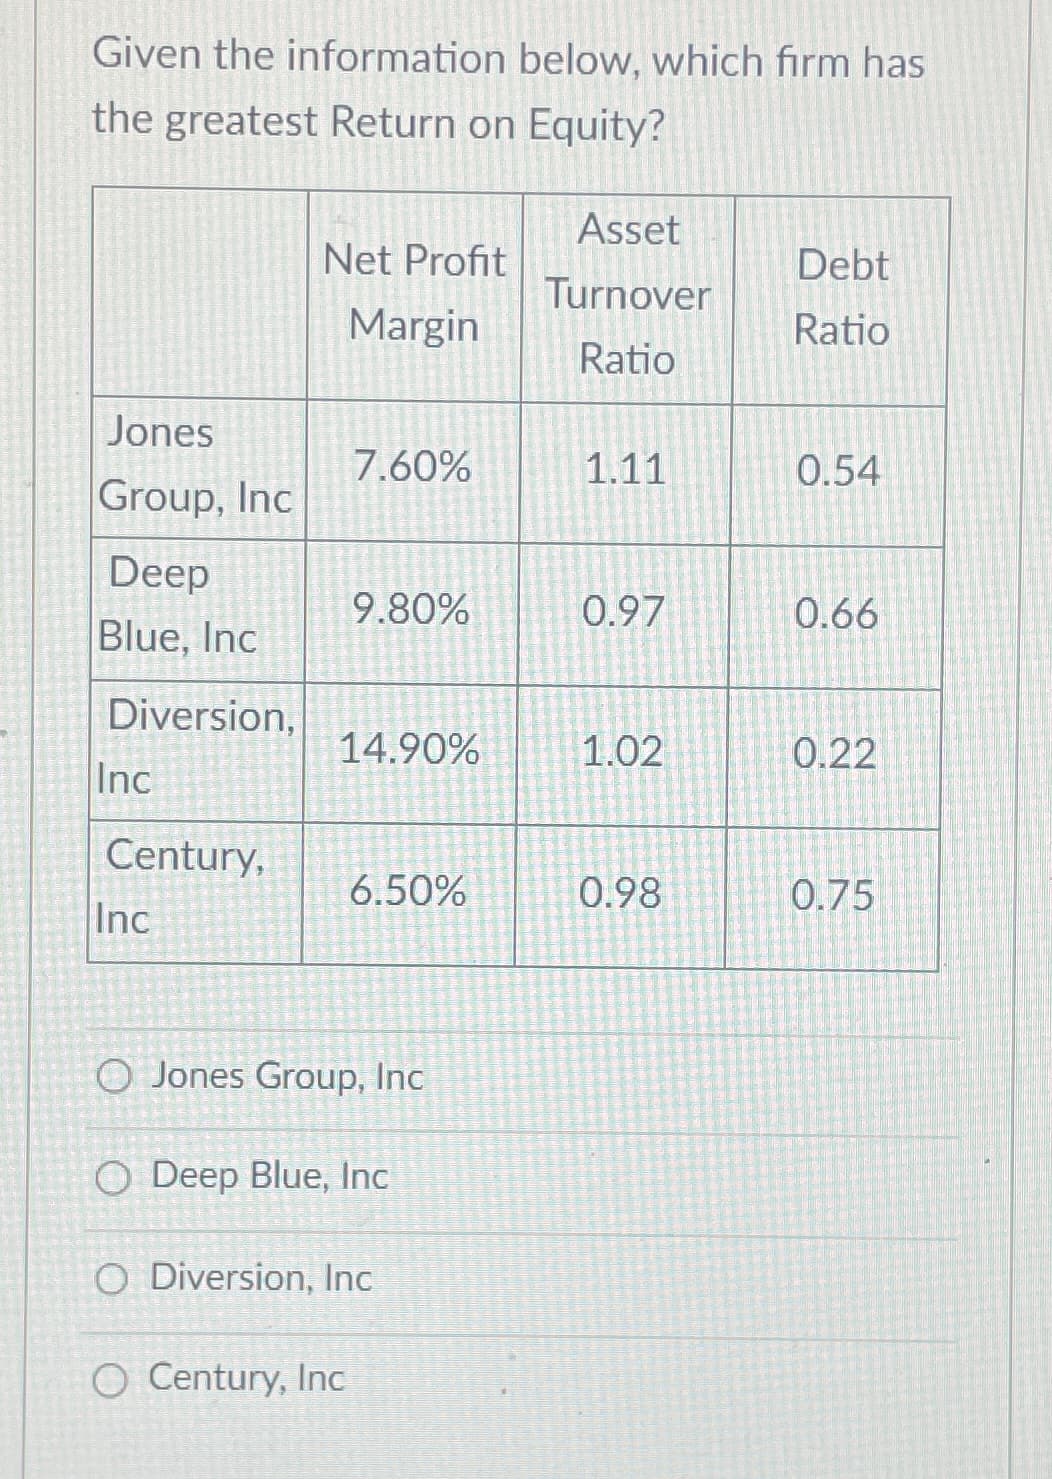 Given the information below, which firm has
the greatest Return on Equity?
Jones
Group, Inc
Deep
Blue, Inc
Diversion,
Inc
Century,
Inc
Net Profit
Margin
7.60%
9.80%
14.90%
6.50%
O Jones Group, Inc
O Century, Inc
O Deep Blue, Inc
O Diversion, Inc
Asset
Turnover
Ratio
1.11
0.97
1.02
0.98
Debt
Ratio
0.54
0.66
0.22
0.75